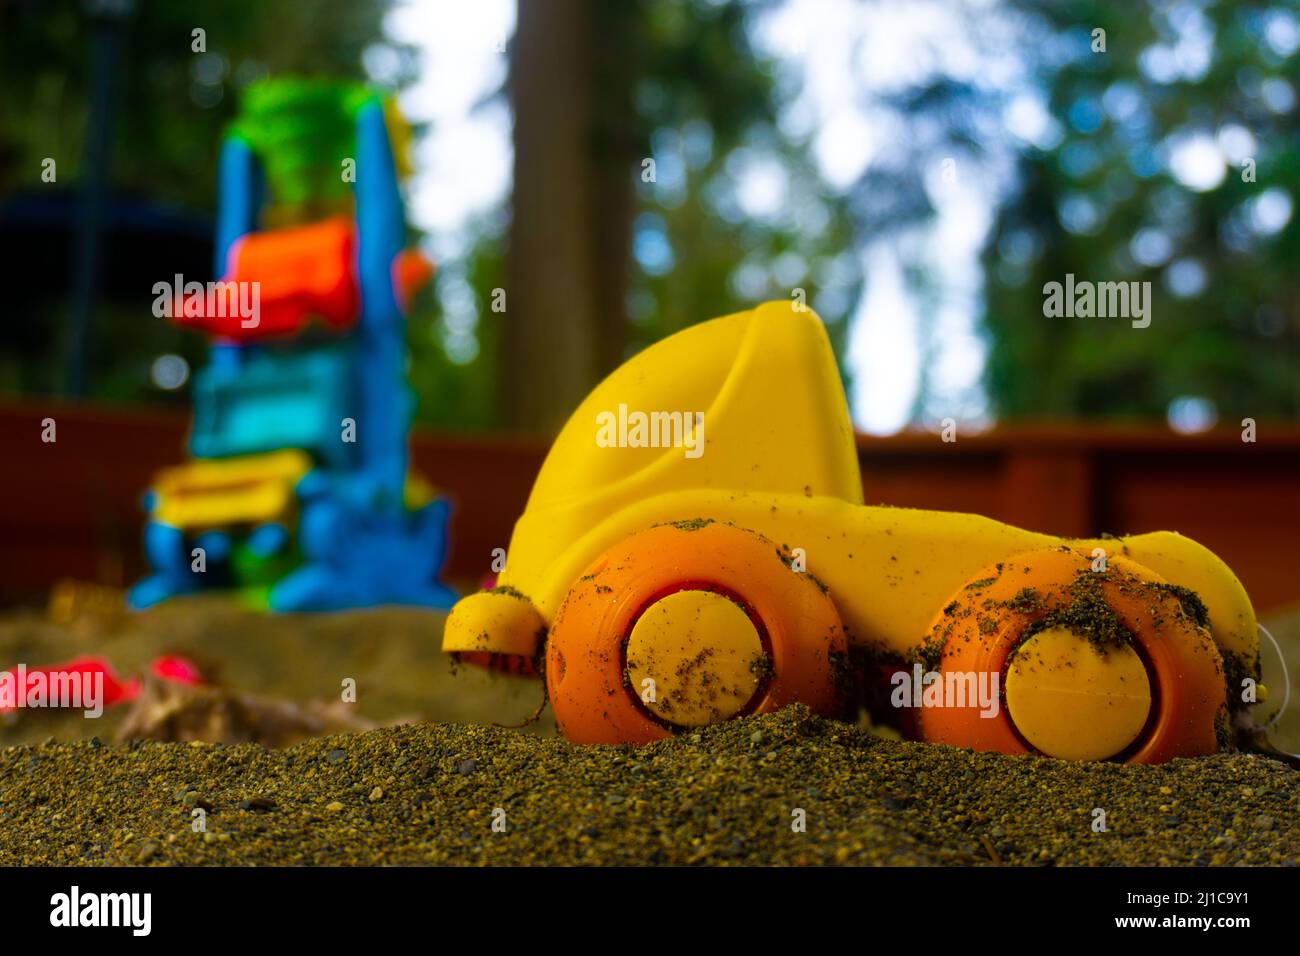 A little truck toy sits in a sand box with other toys blurred out in the background. Stock Photo